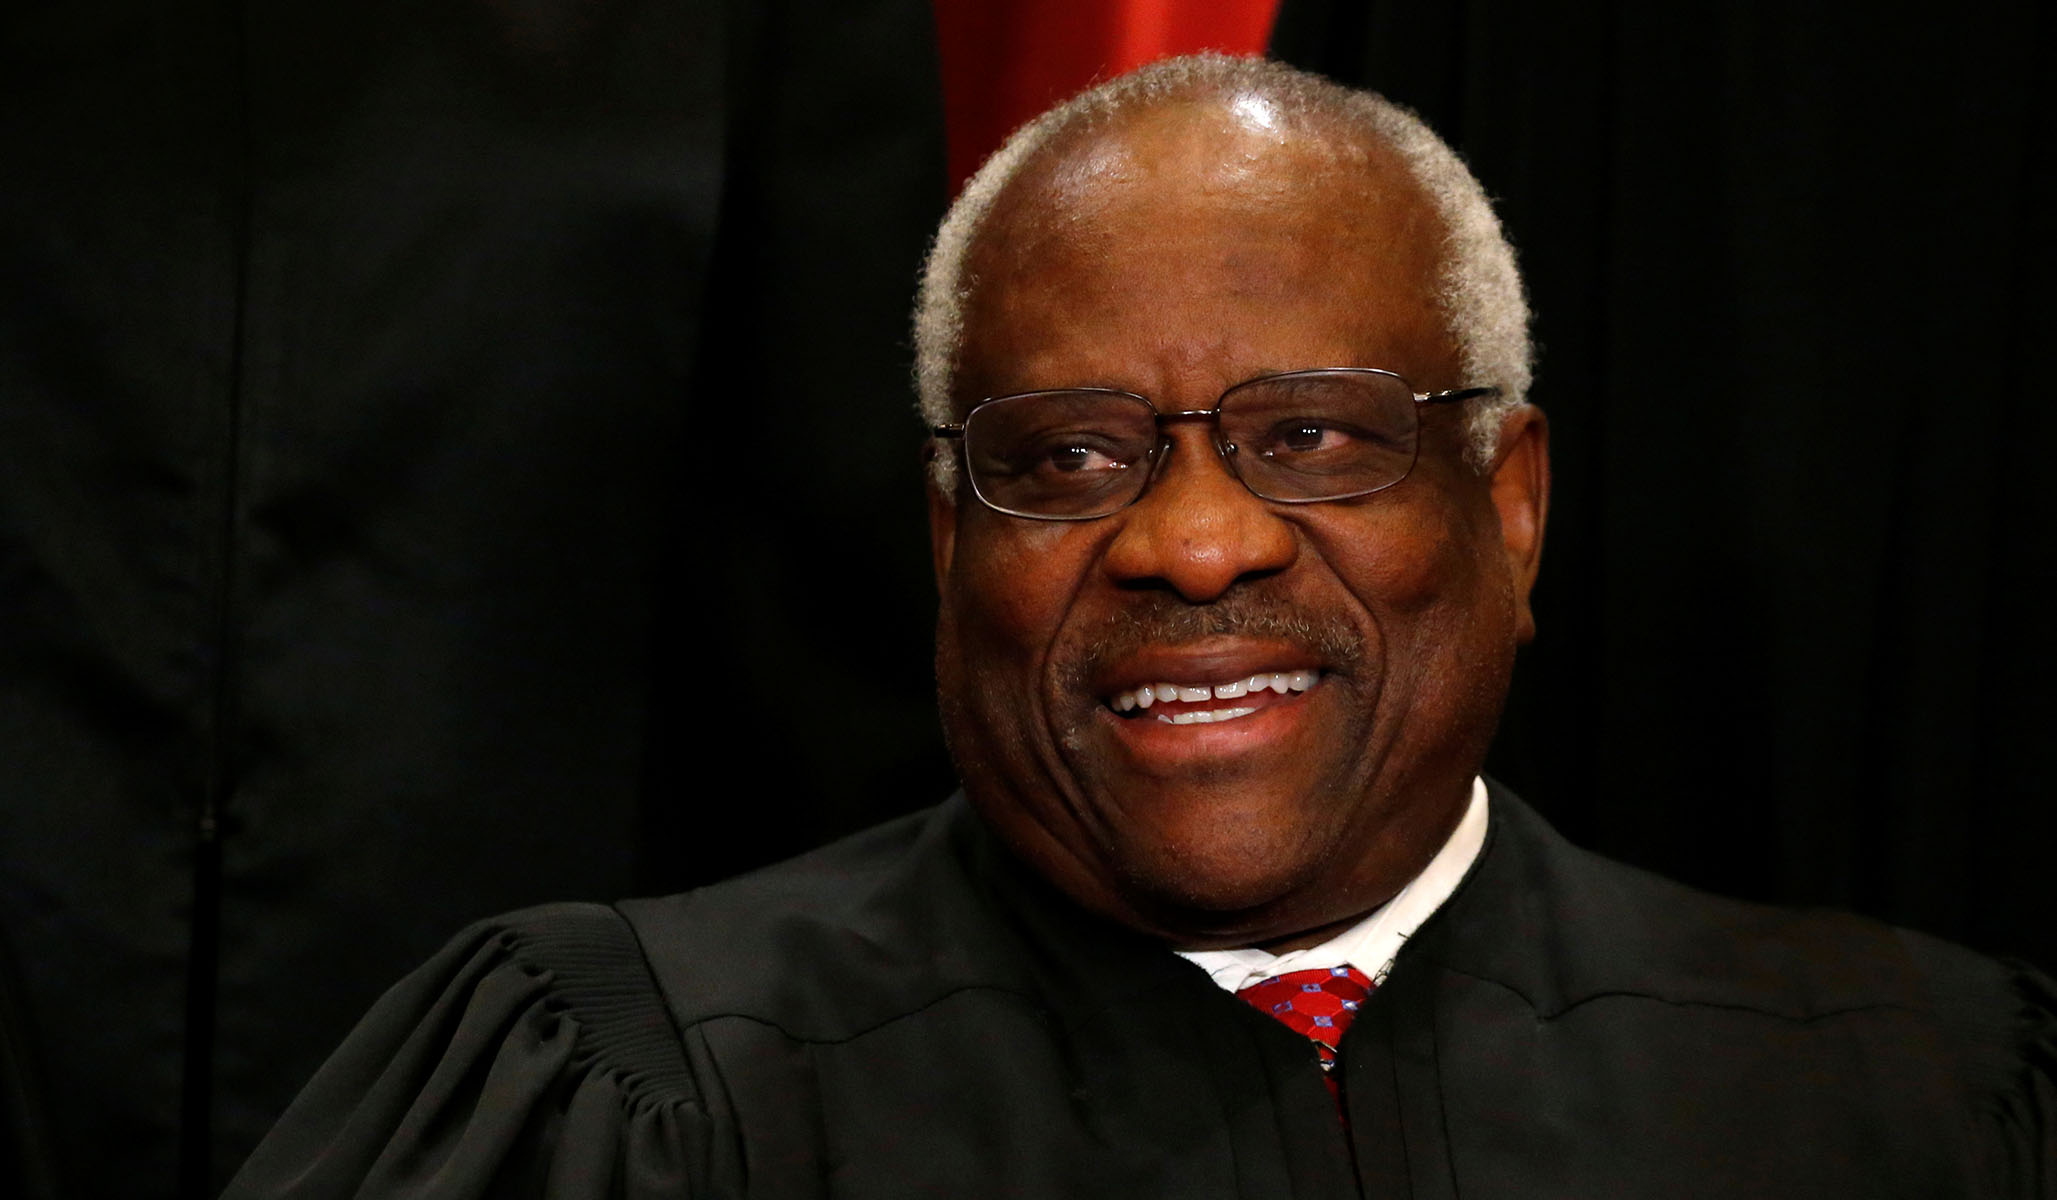 U.S. Supreme Court Justice Clarence Thomas